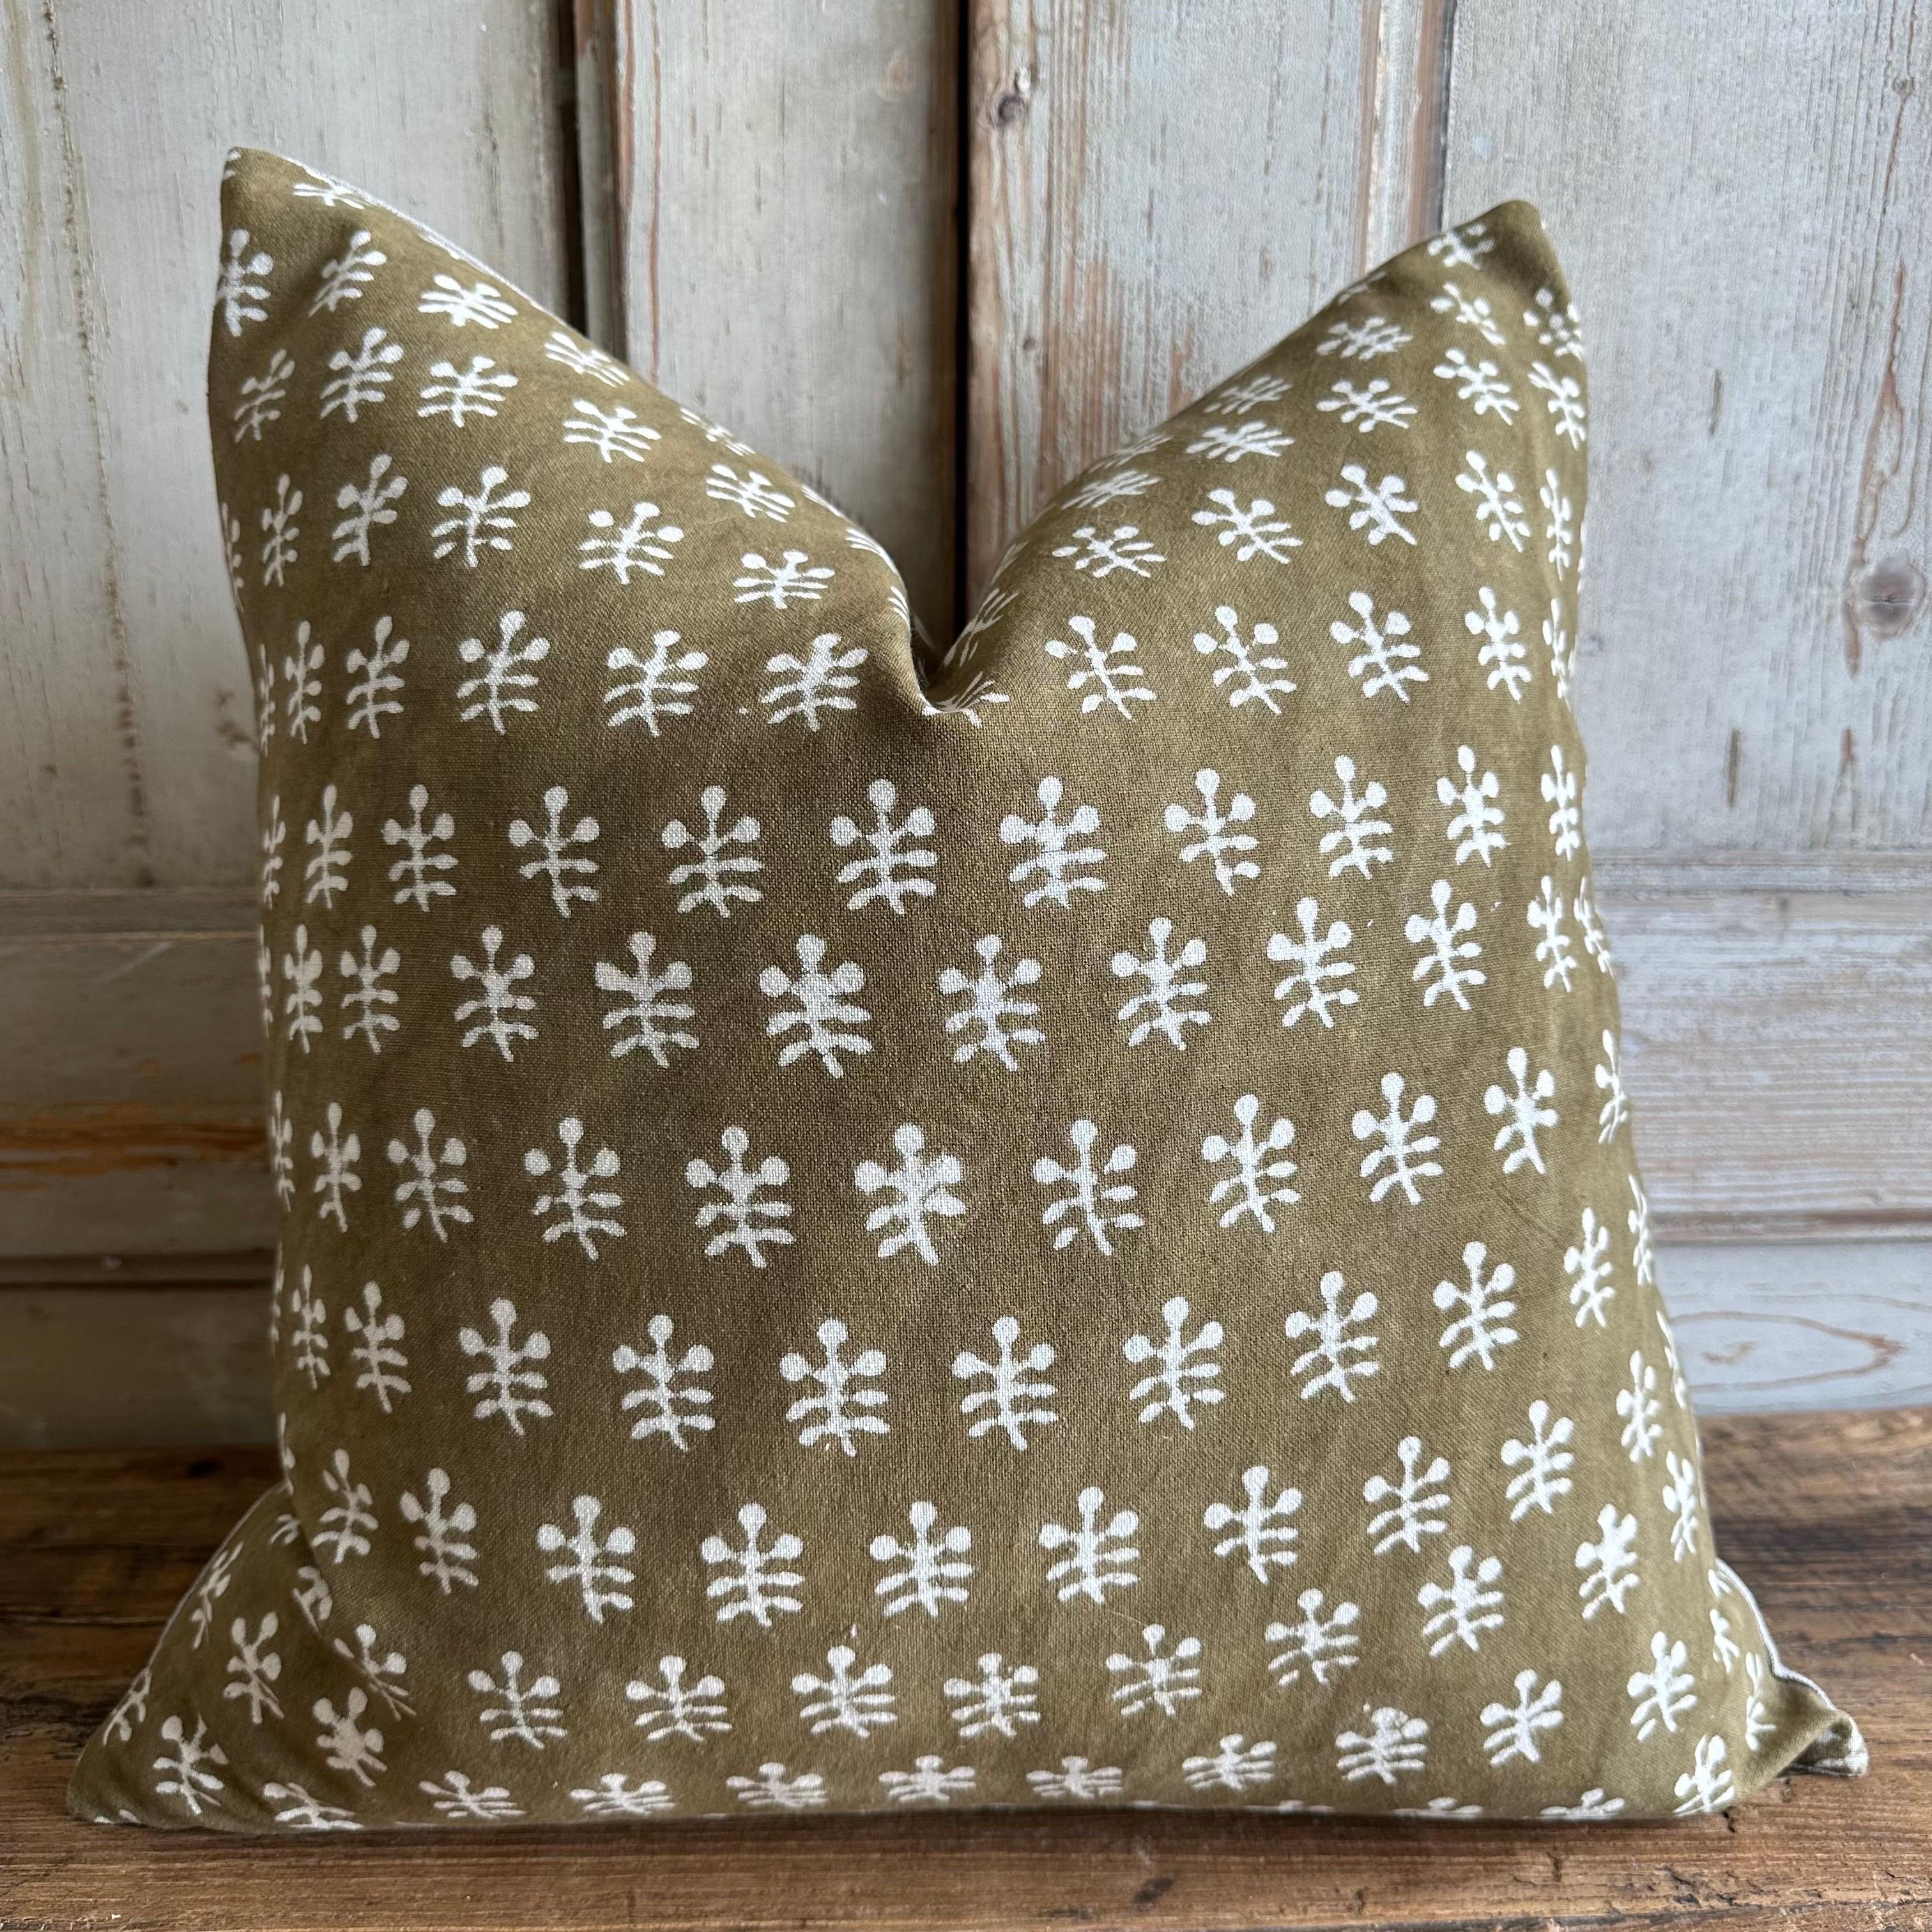 Custom Made Linen and cotton pillow with down insert
See qty available, these are one of a kind items.
The face is a pretty khaki green color with white design. The backing is a flax linen, and hidden zipper closure.
Down / Feather insert is